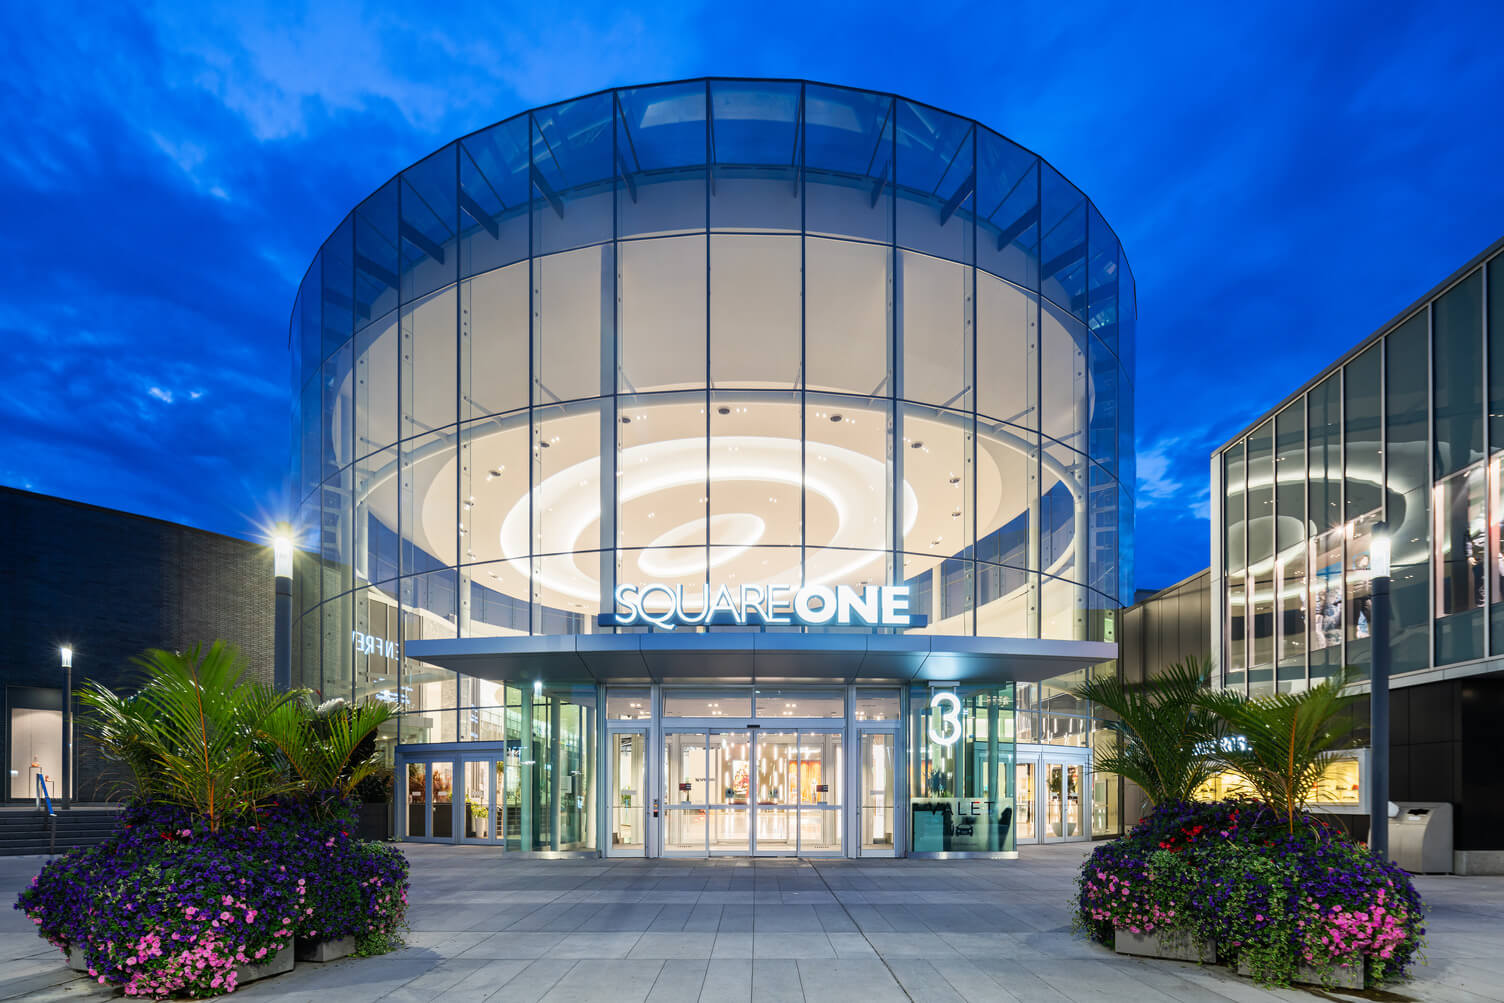 Square One entrance